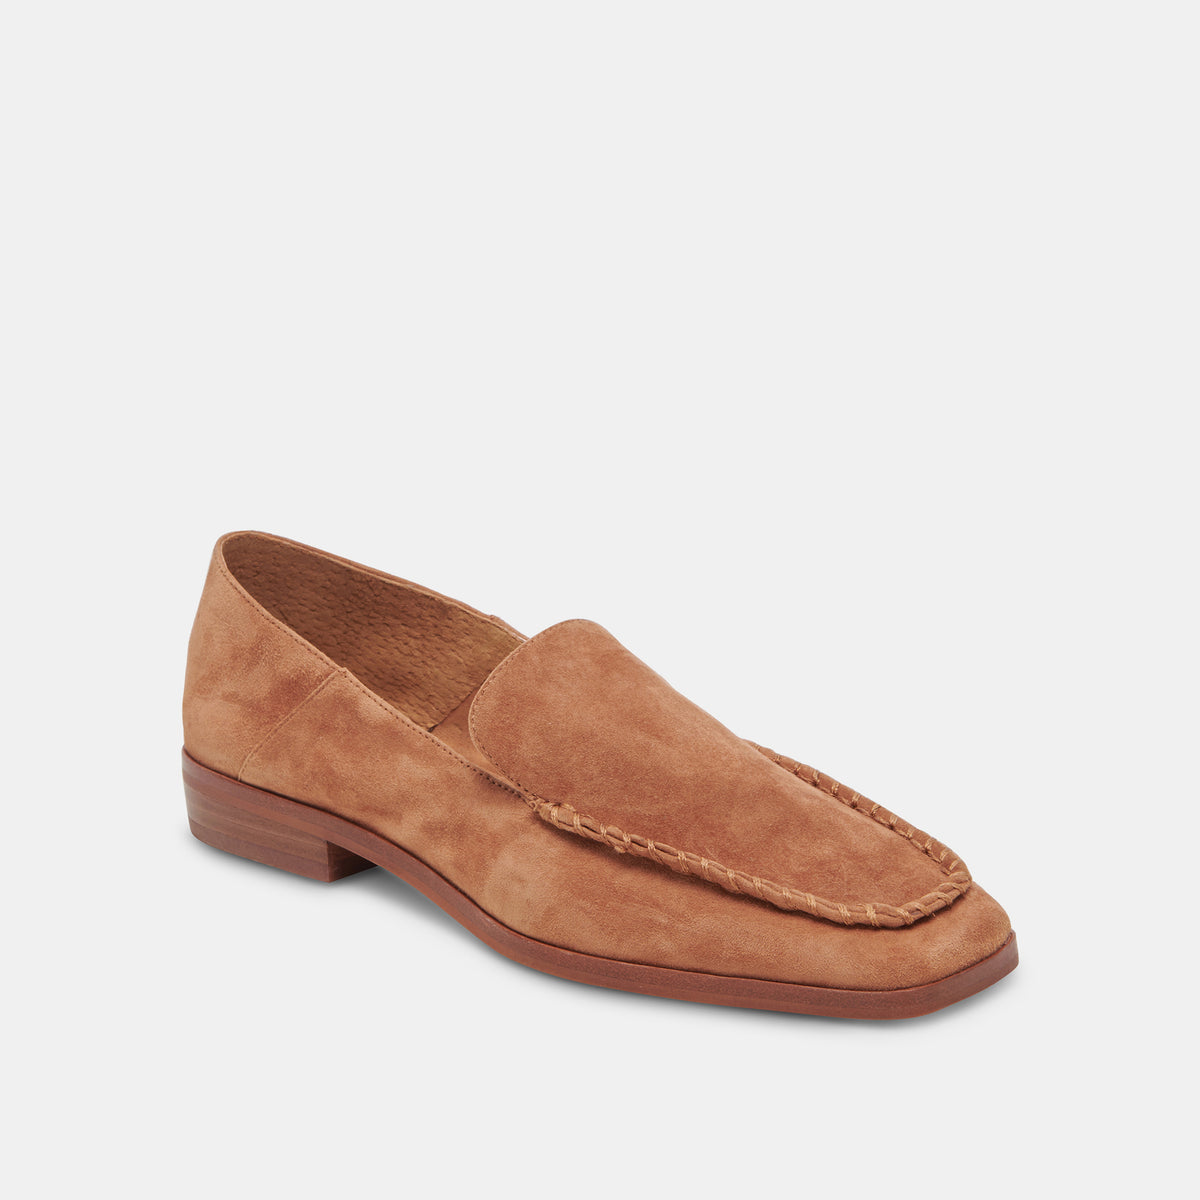 BENY FLATS BROWN SUEDE – Dolce Vita